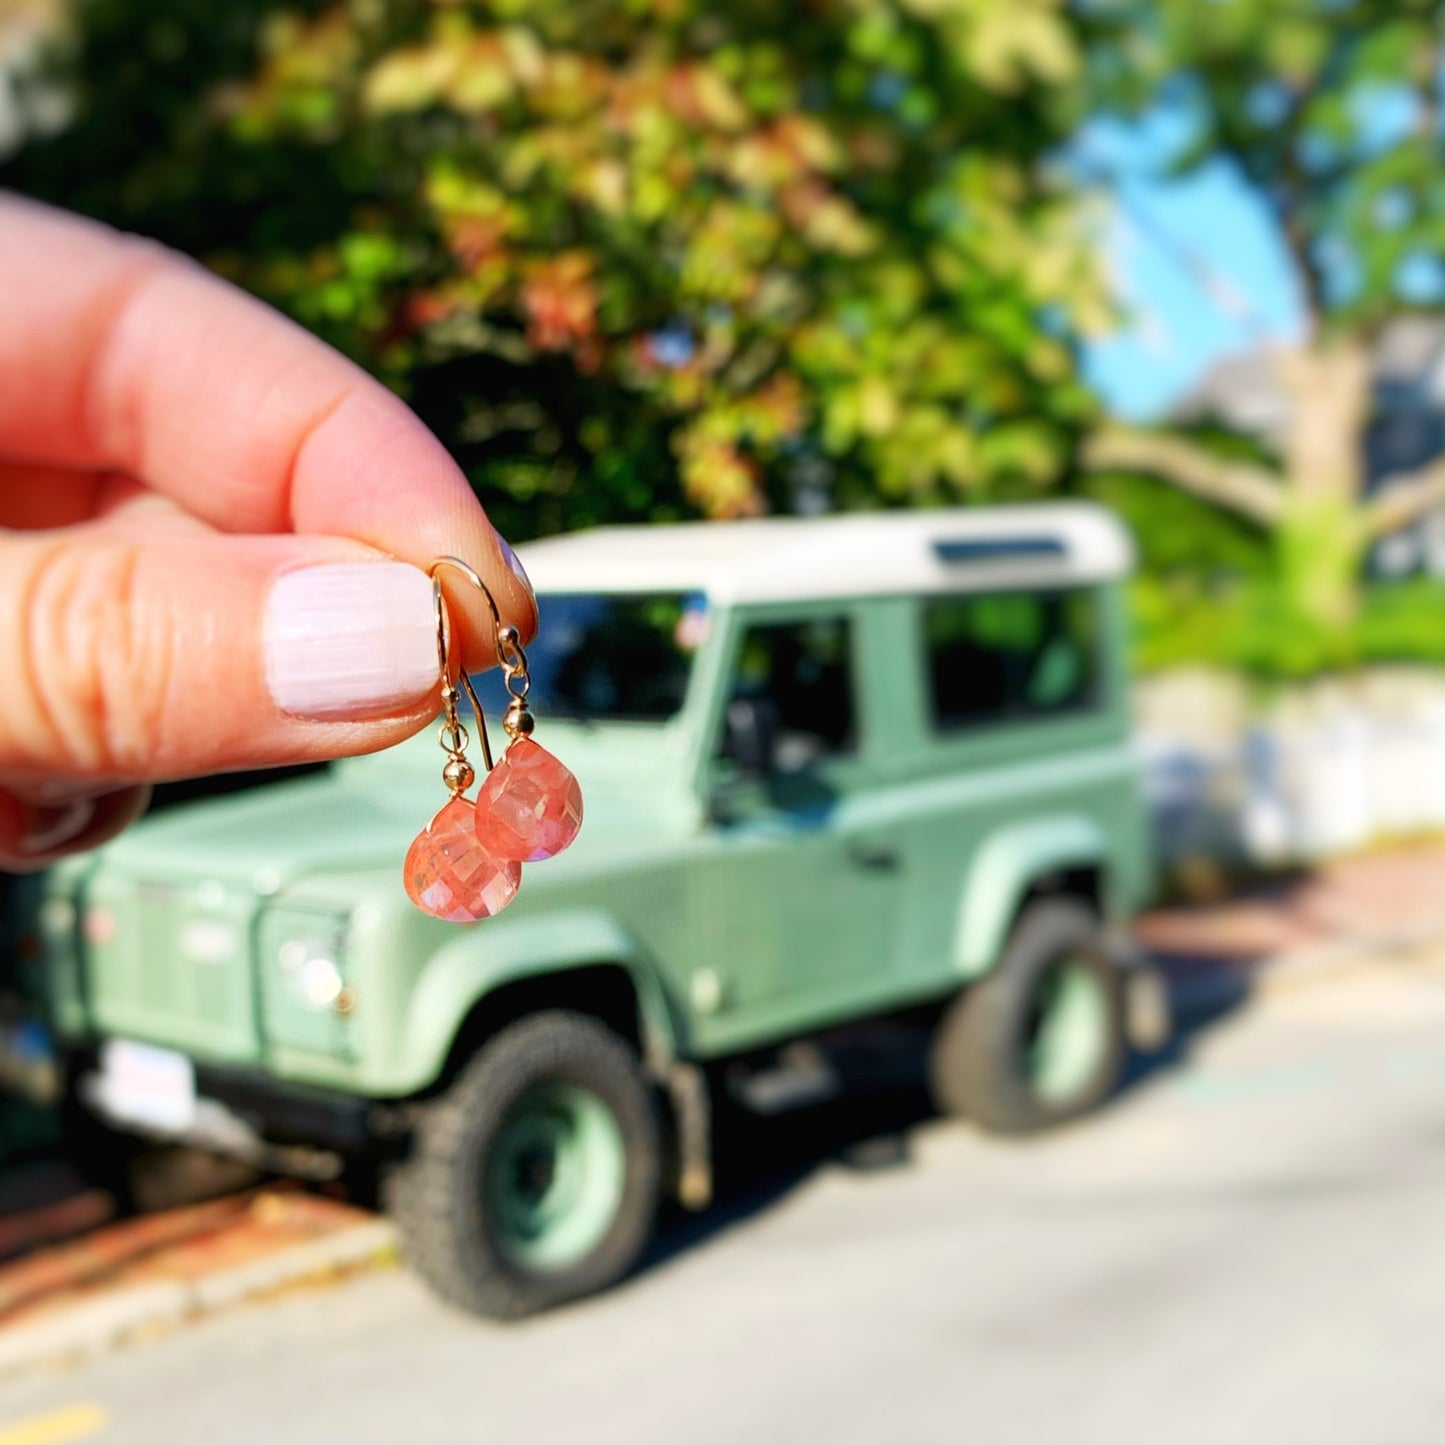 Chatham Earrings by Mermaids and Madeleines feature cherry quartz drops and 14k gold filled findings. this pair is held up in a hand in front of a green offroading vehicle as a background